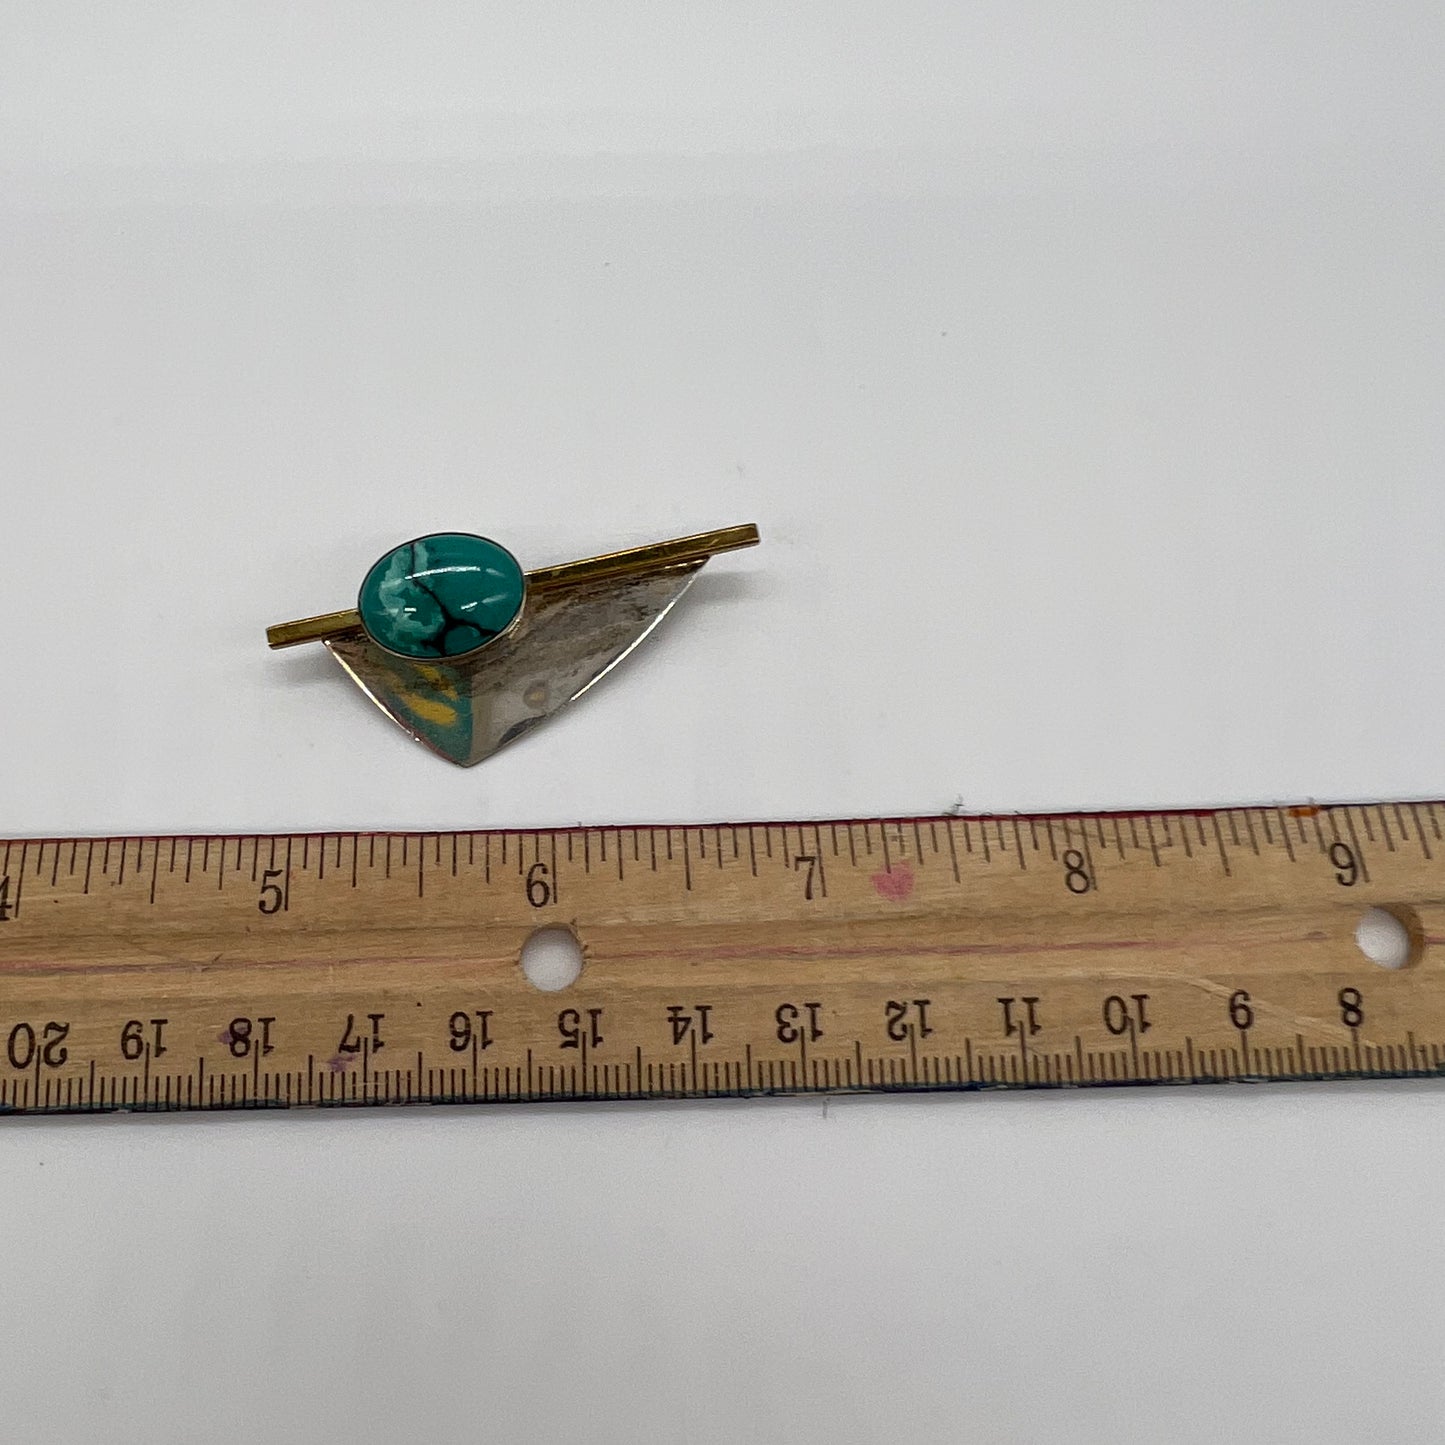 Turquoise and Silver Pin Signed AJV